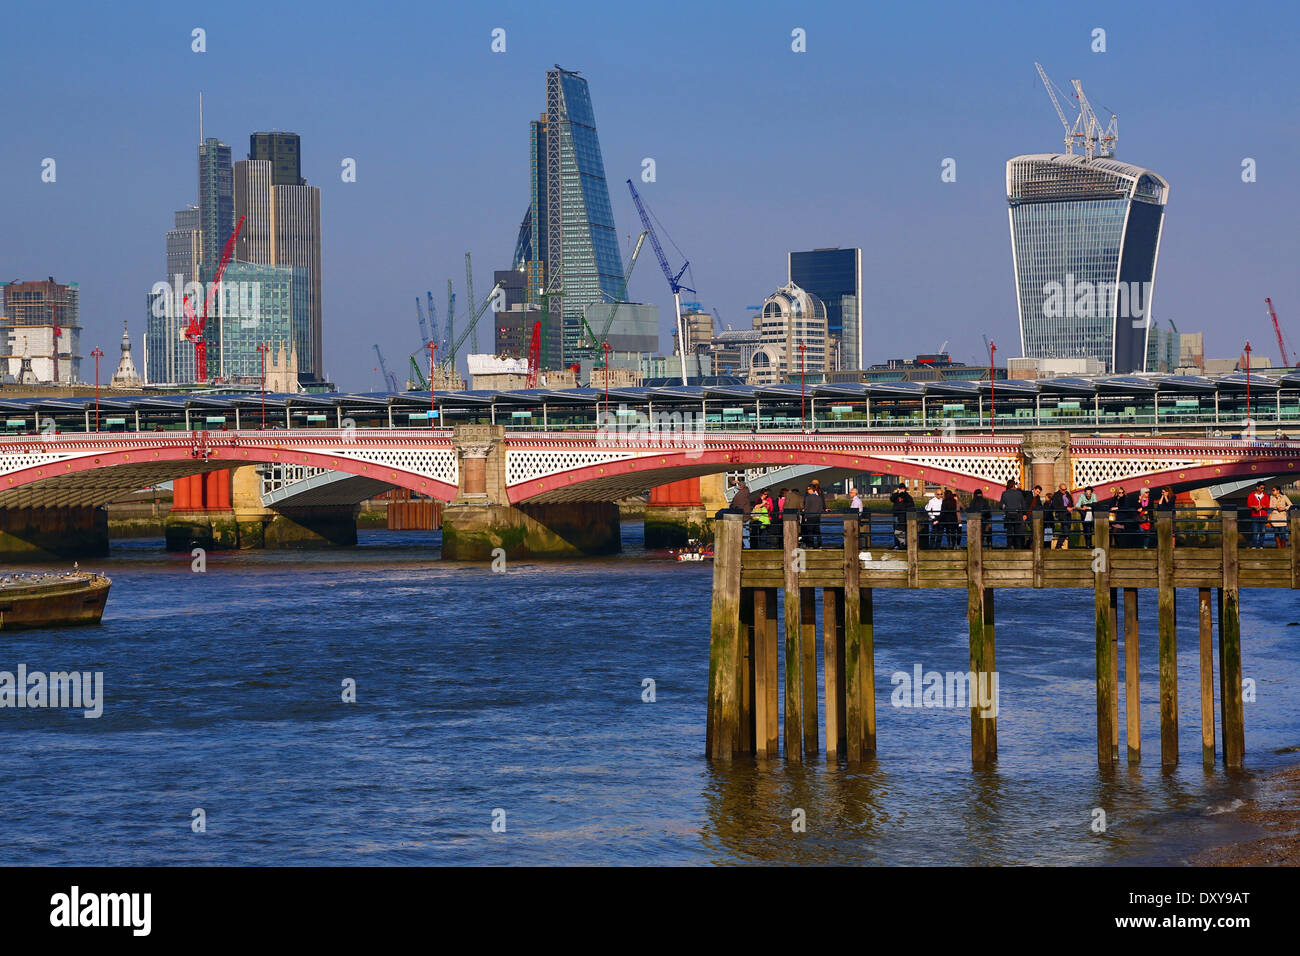 Wooden pier at Oxo Tower Wharf on the River Thames with Blackfriars Bridge and the City of London skyline in London, England Stock Photo